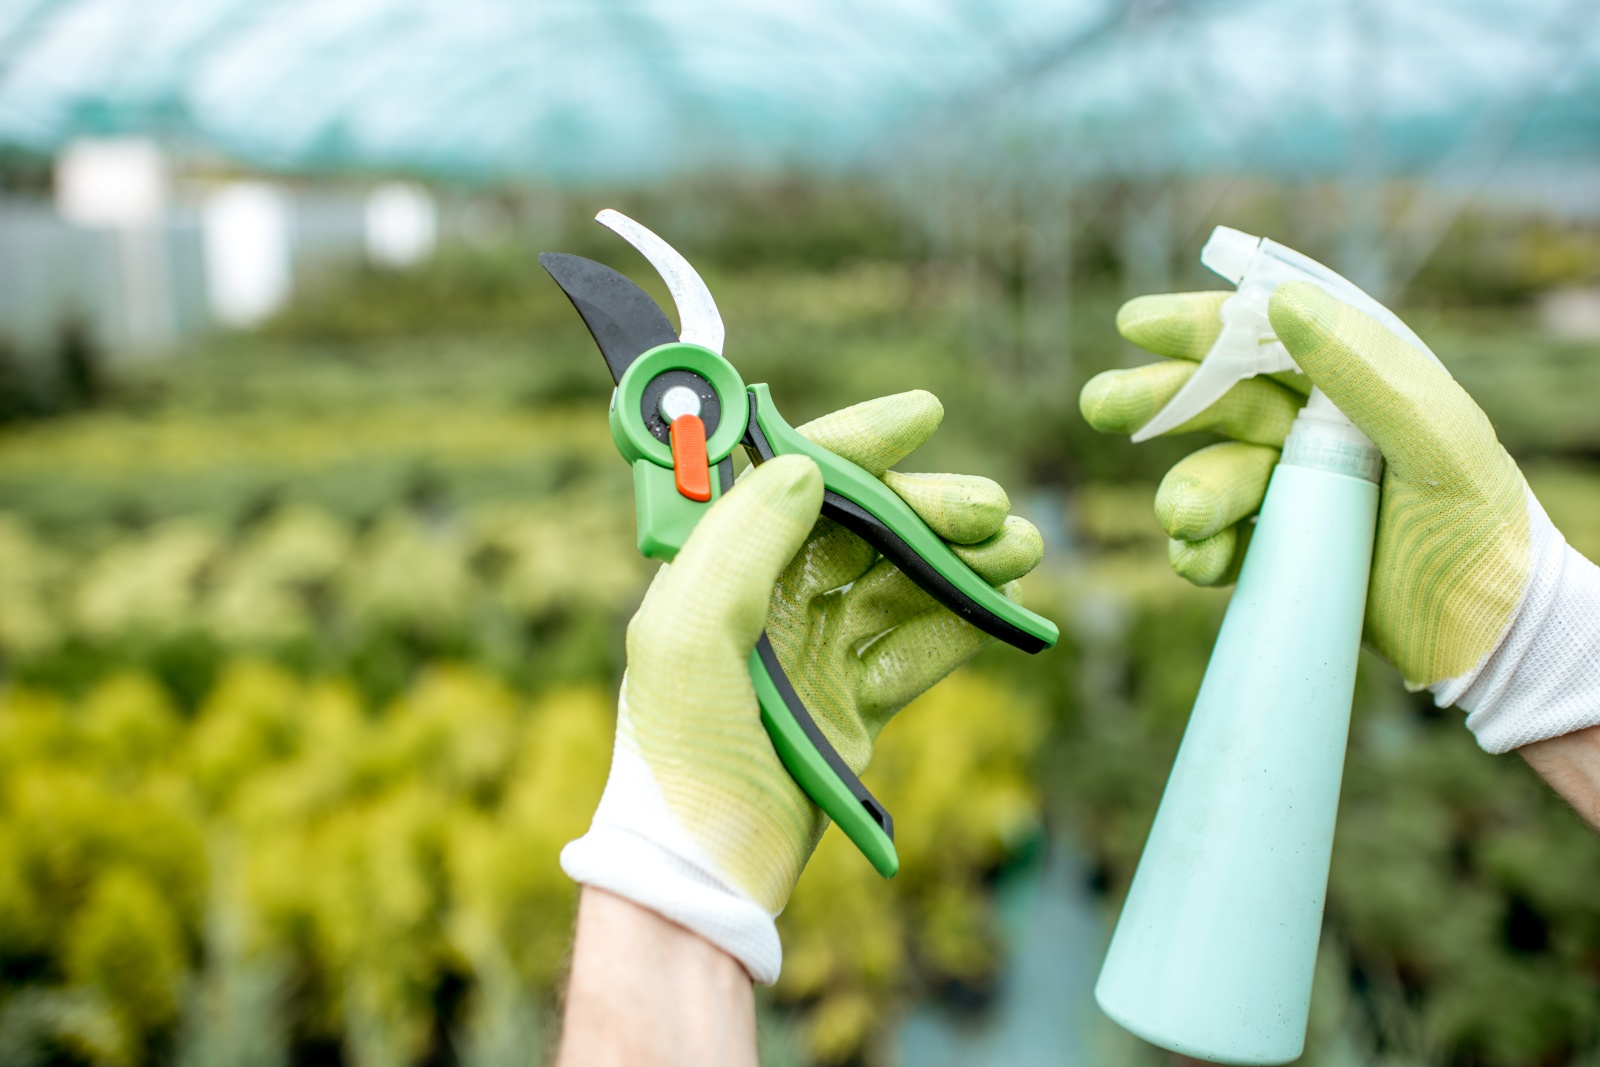 How To Store And Care For Your Pruners